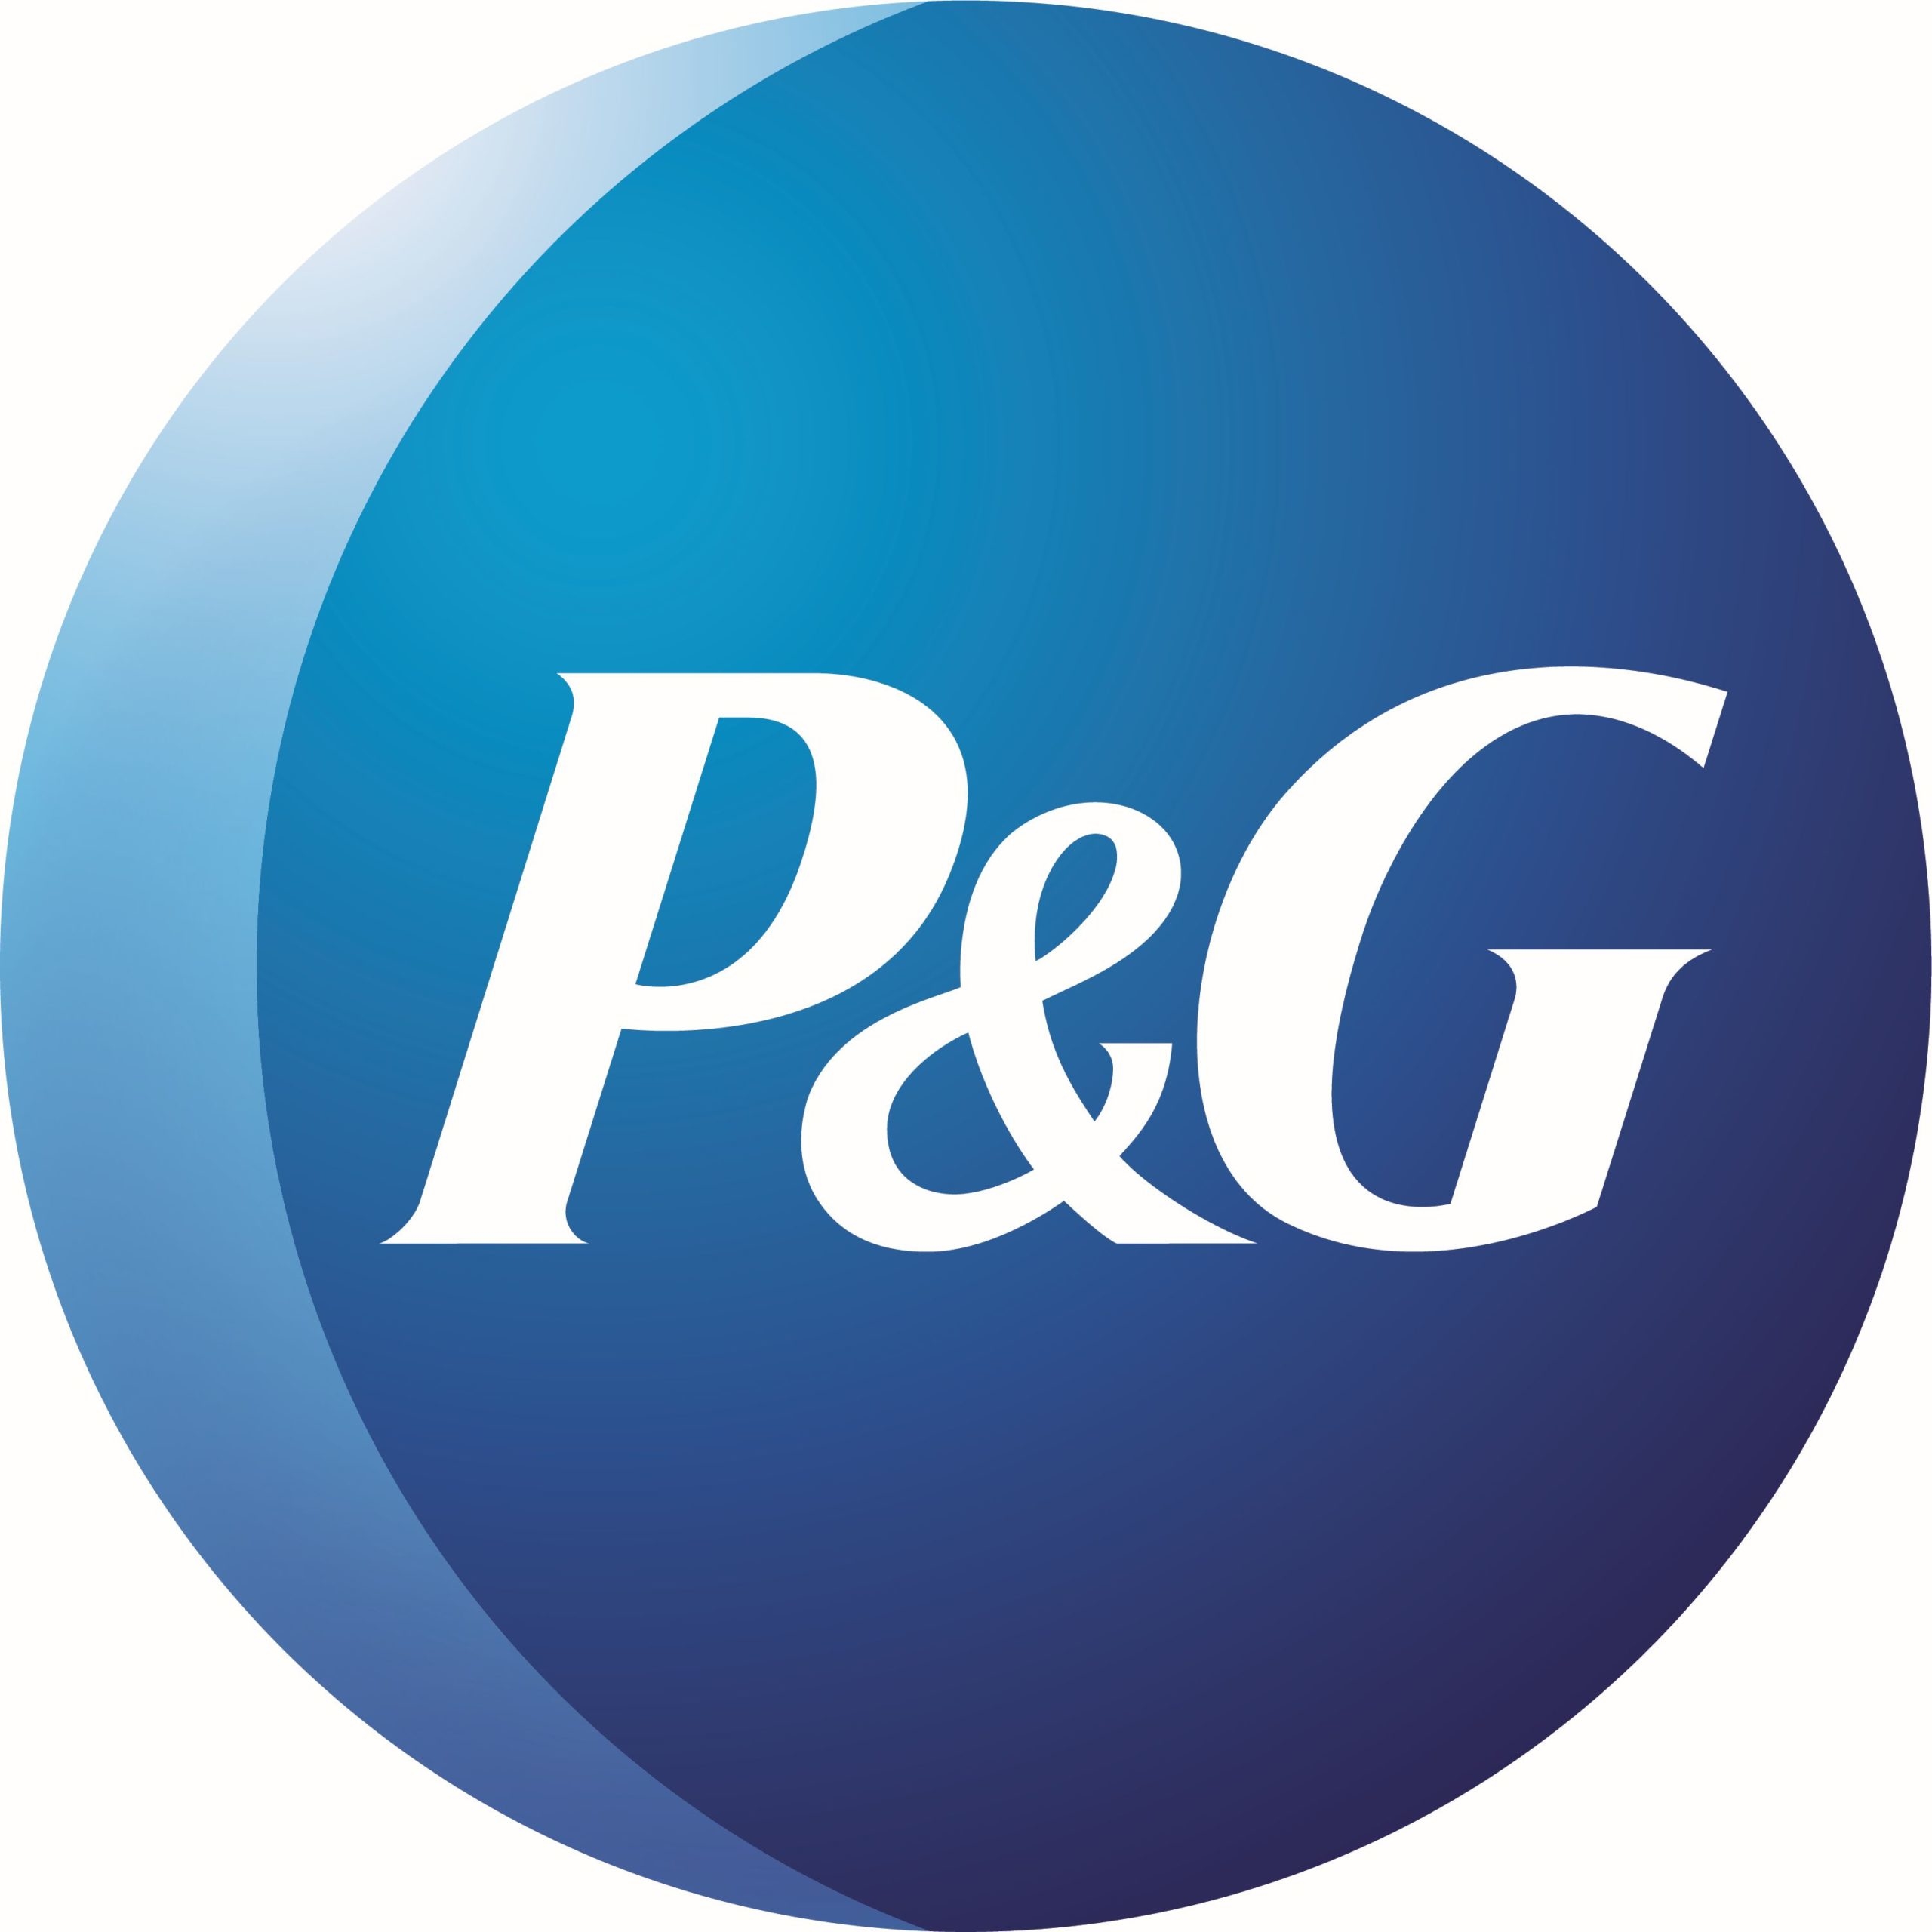 Procter & Gamble is Hiring (Finance, Supply Chain or Sales)